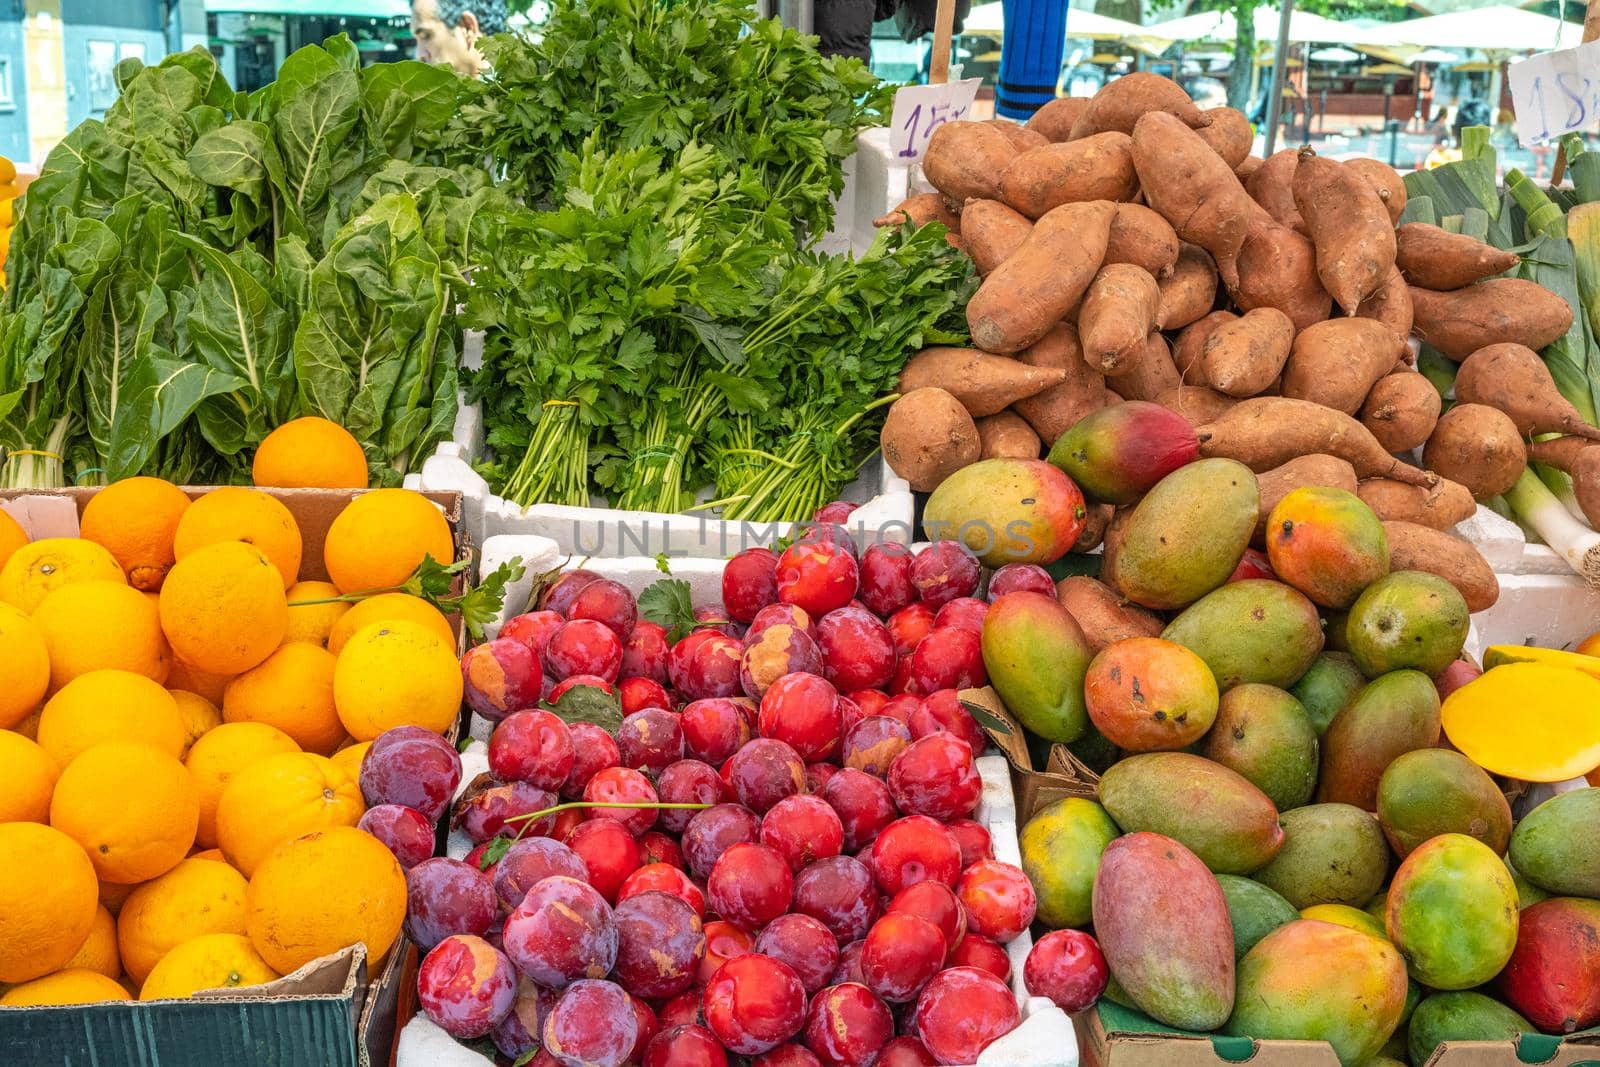 Fruits, vegetables and herbs for sale at a market